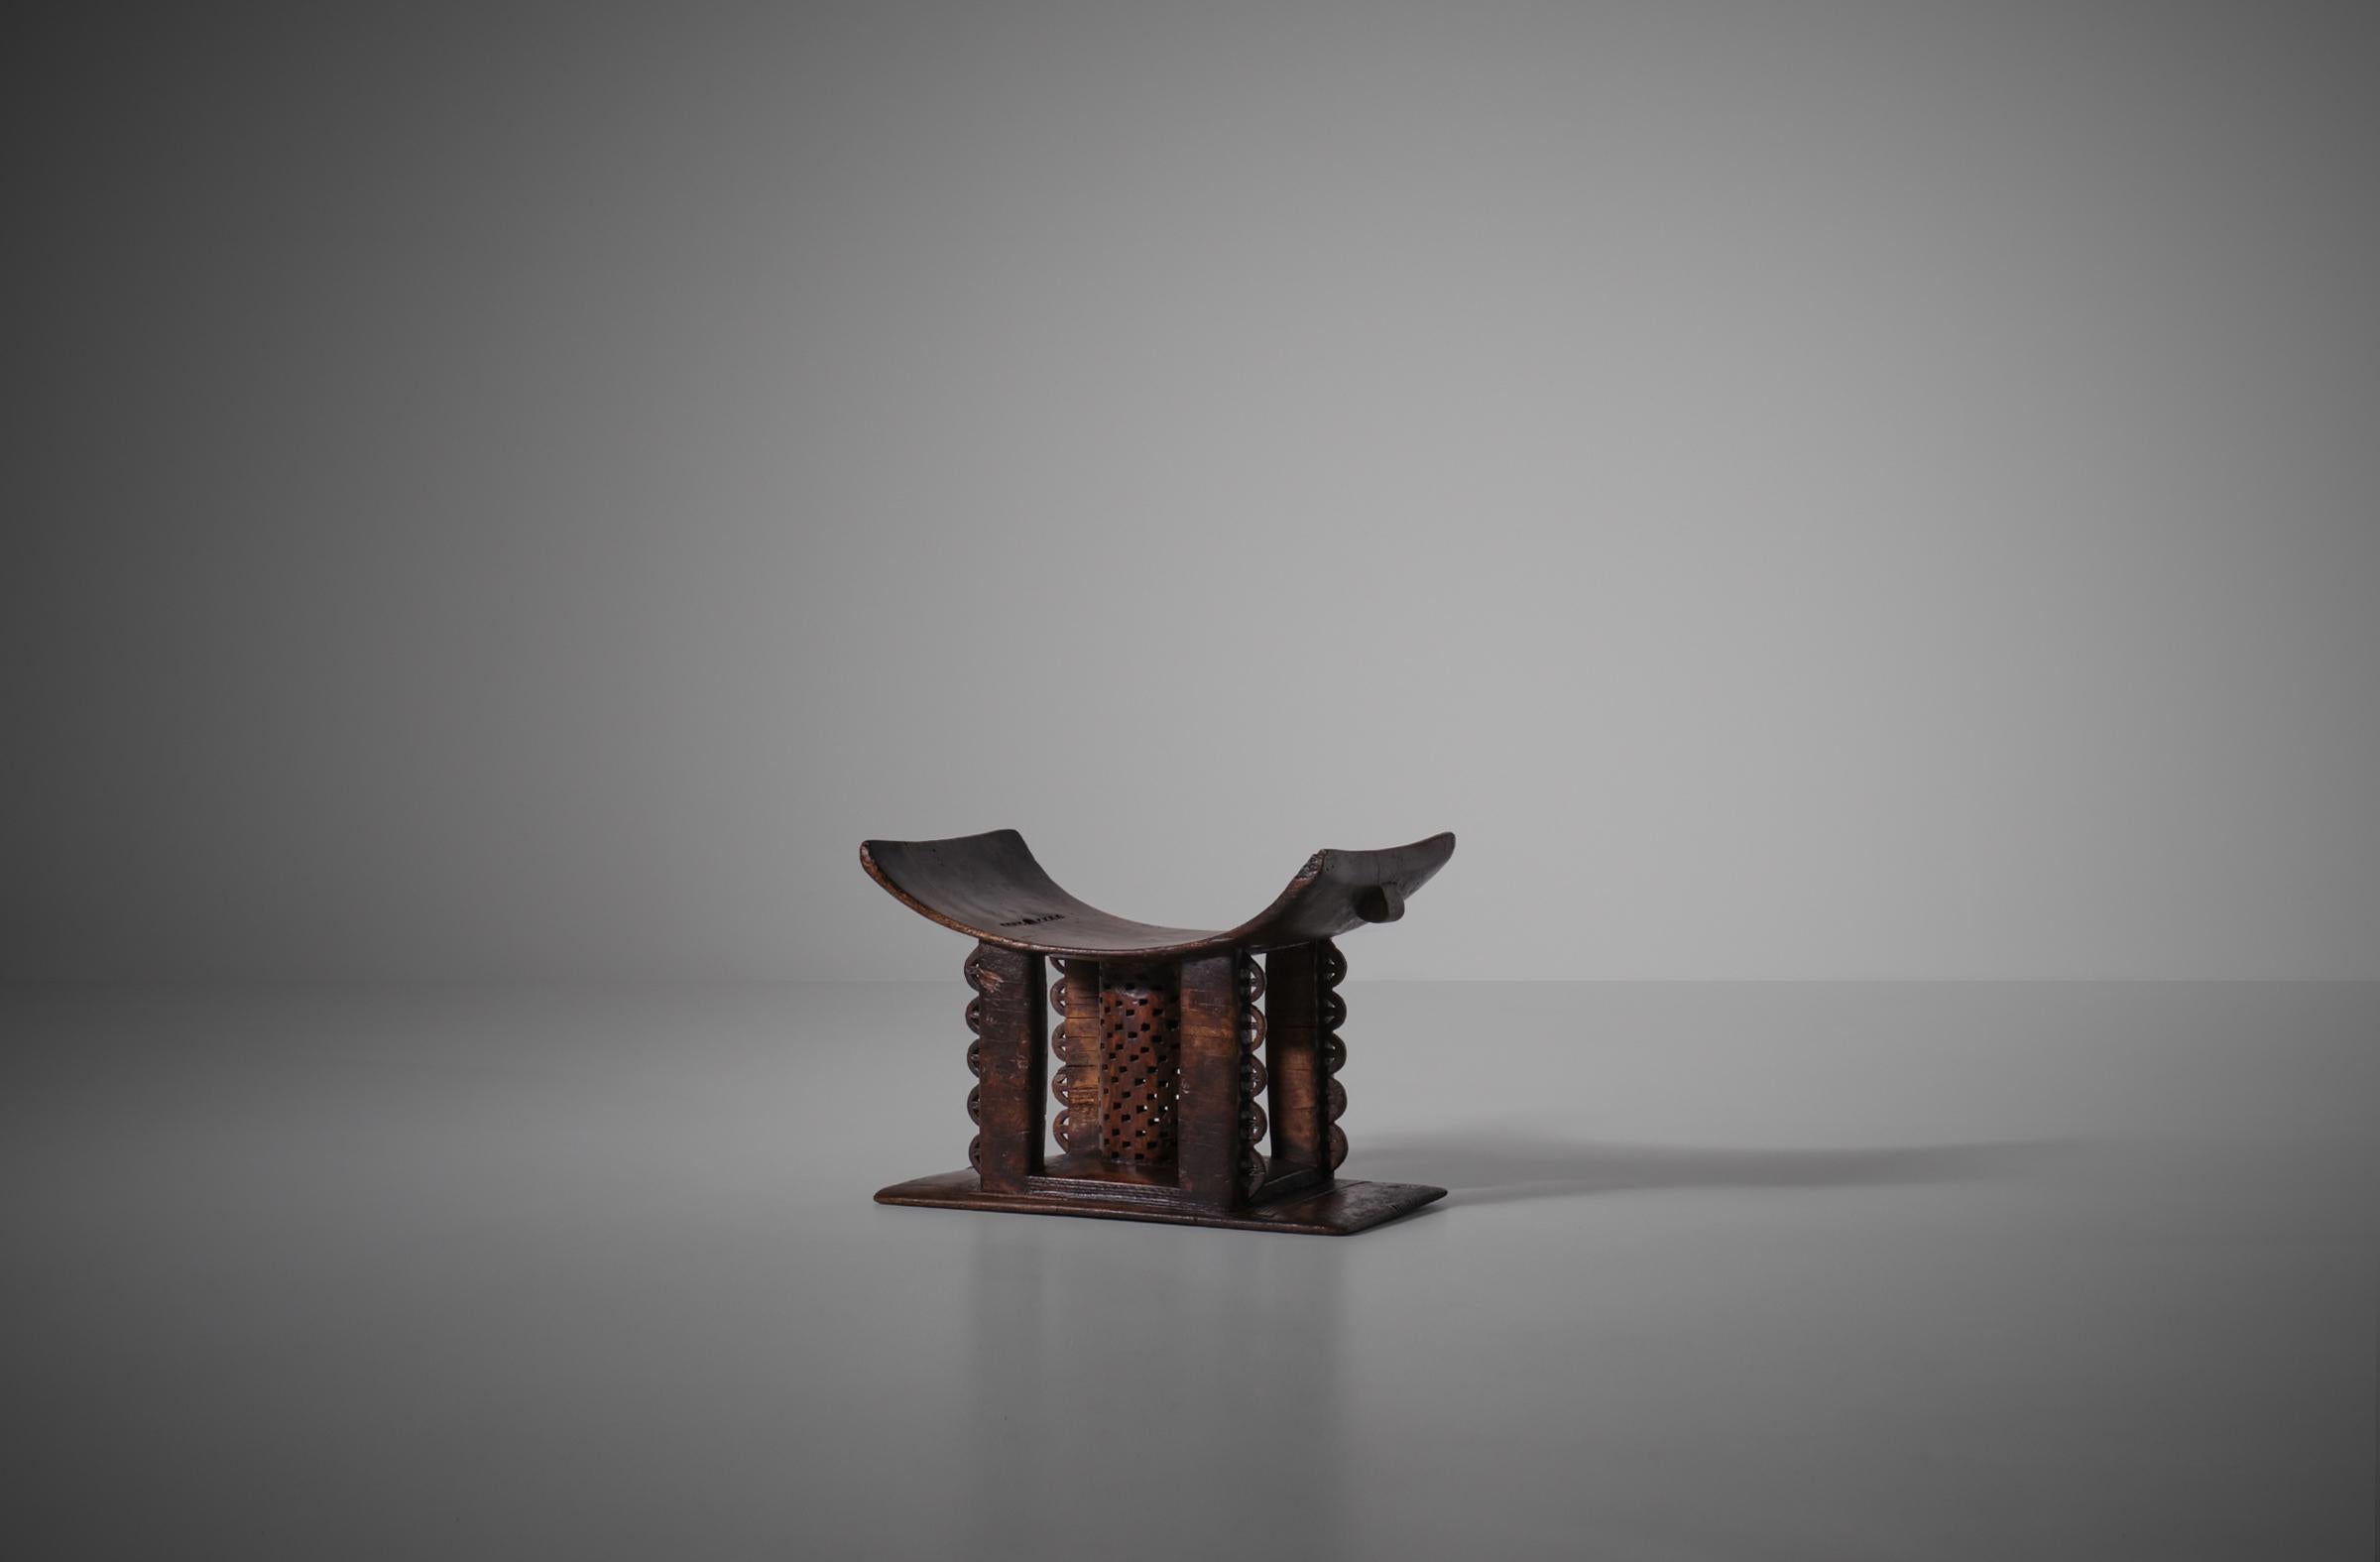 Original hand carved African tribal Ashanti stool - Ghana, early 20th century. Very nice details carved out of one solid piece of wood. The curved seat is supported by a decorative center cylindrical column and four stems which rises out of the flat